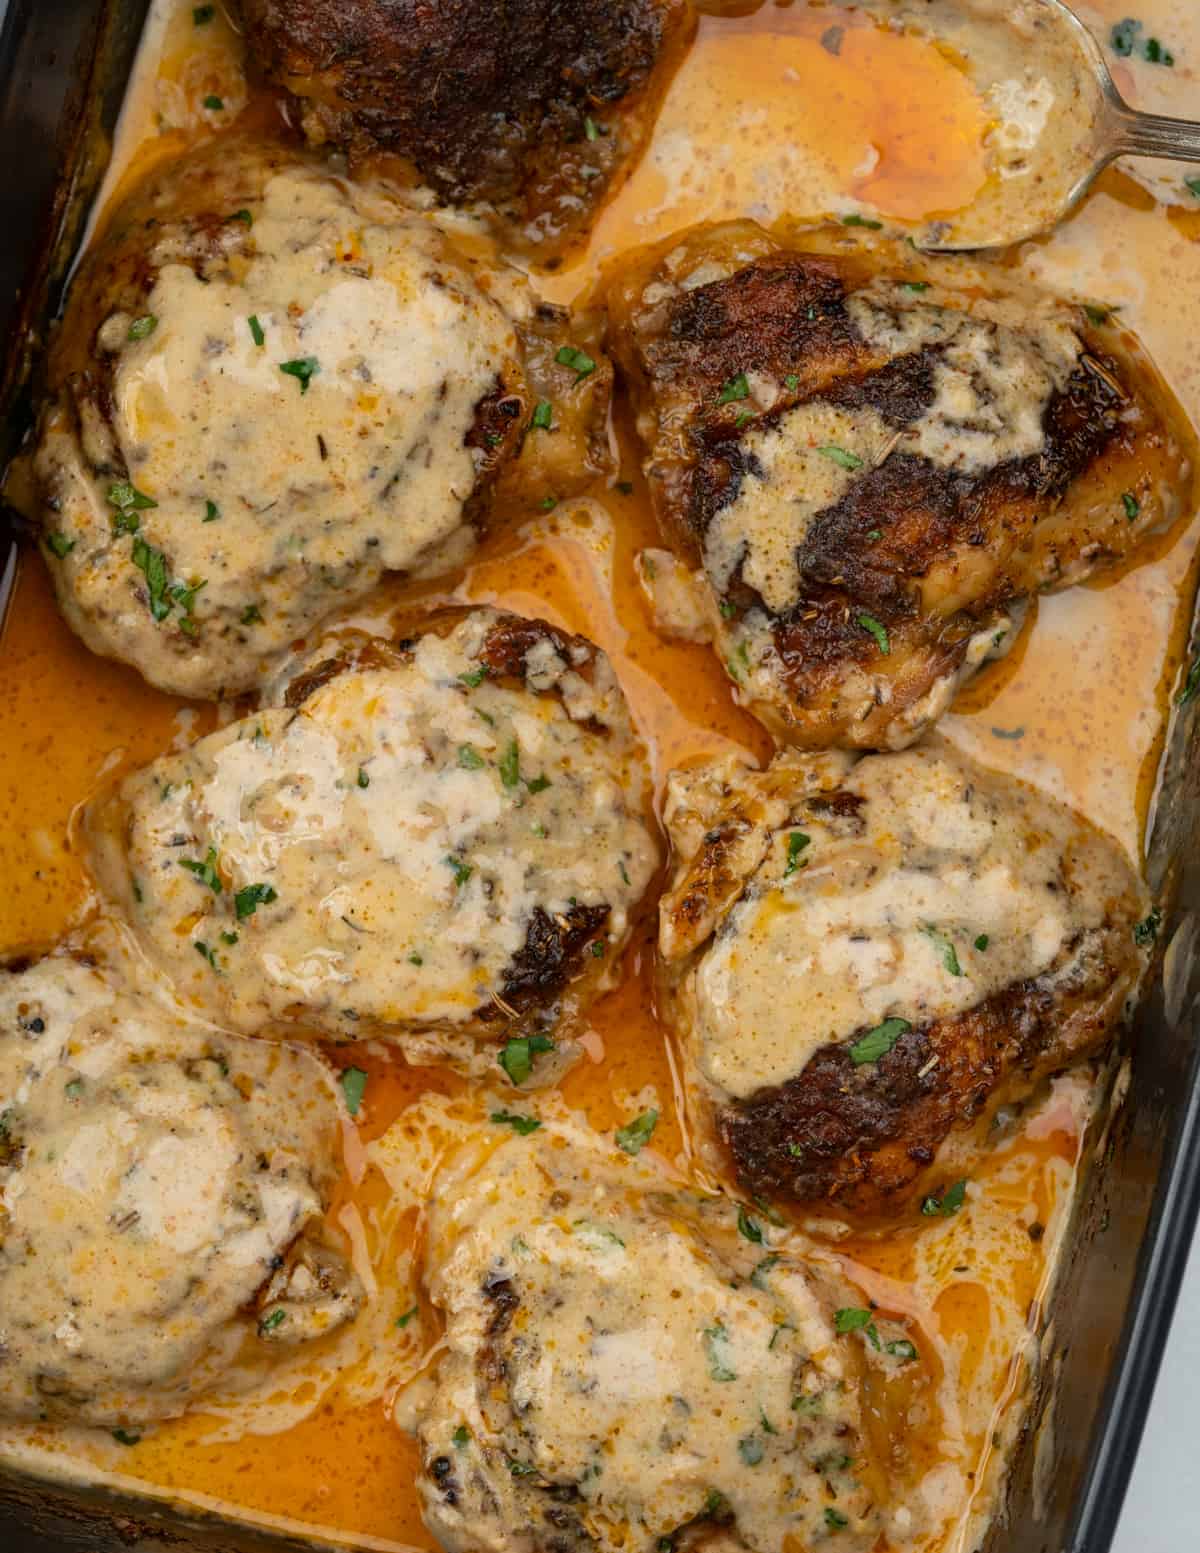 Oven baked chicken thighs in a creamy parmesan sauce. 